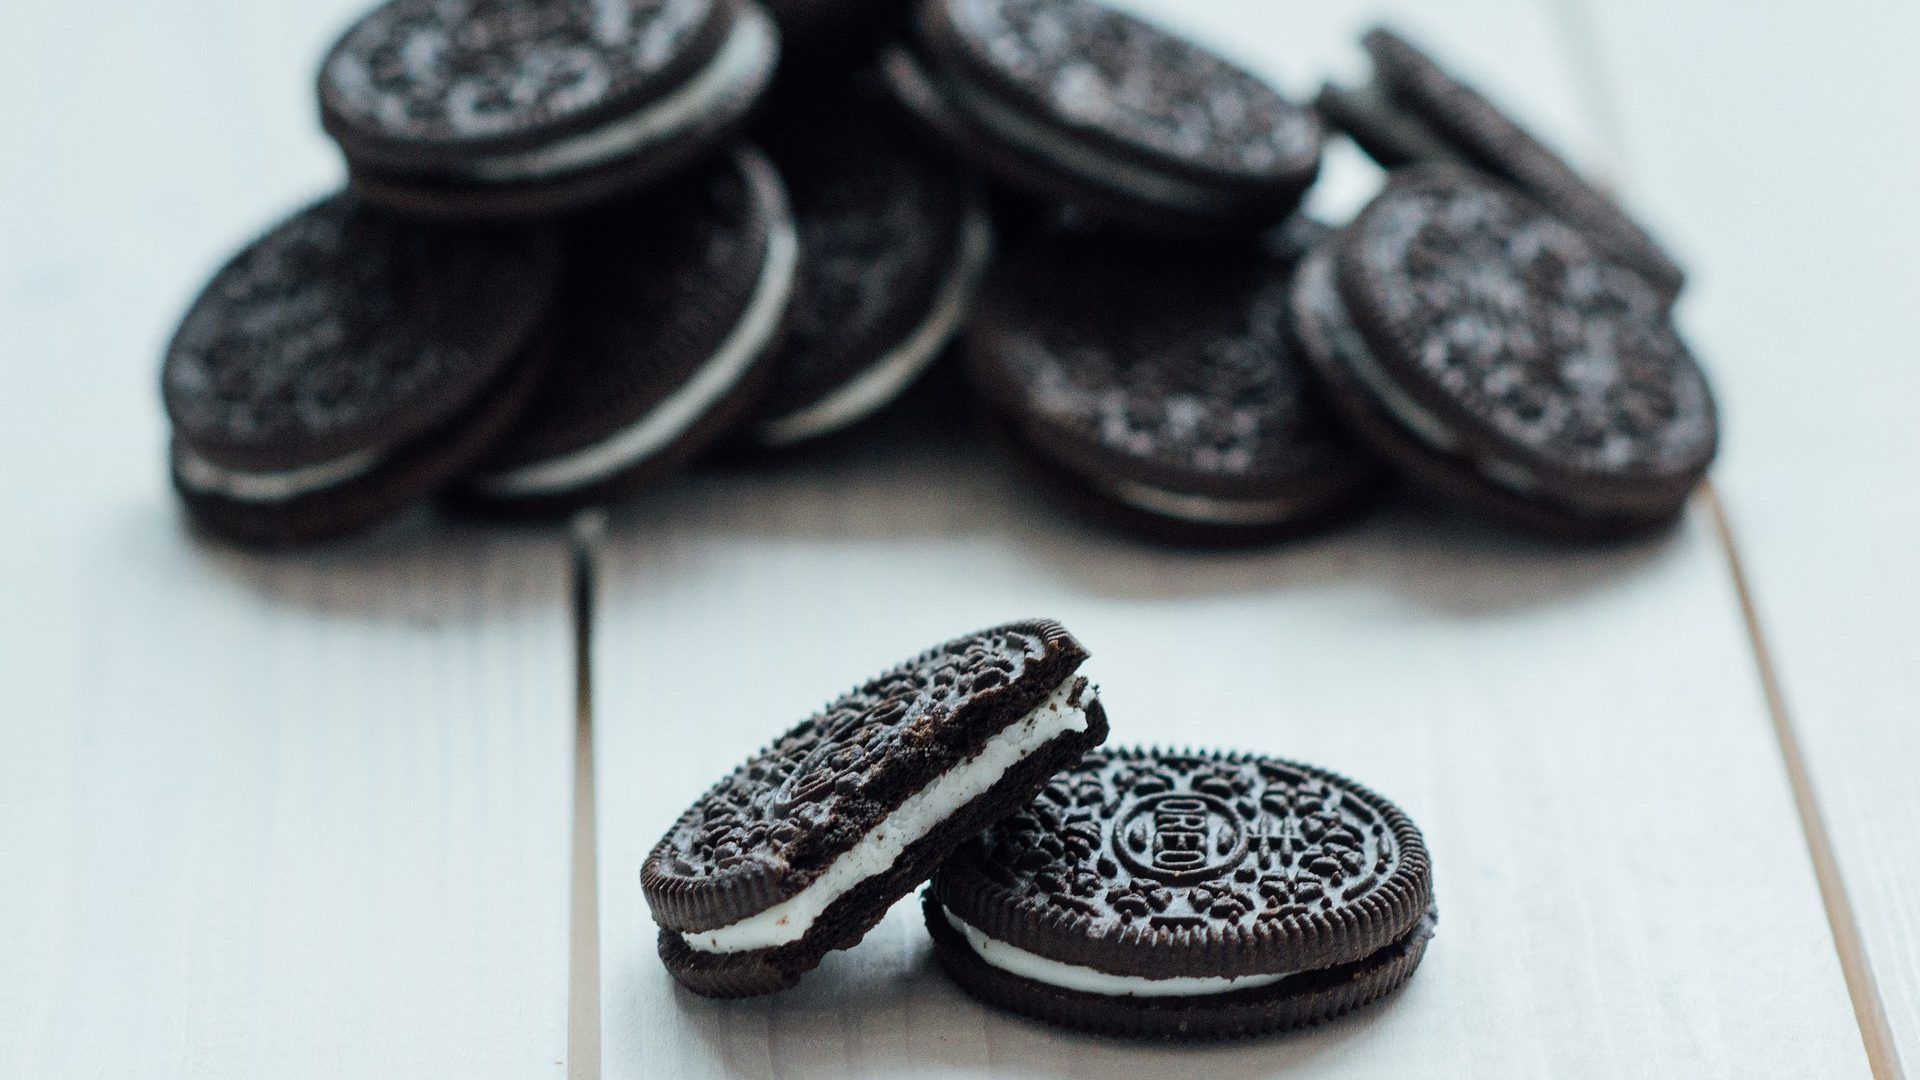 Have You Heard About Oreo’s $500,000 Contest Yet?